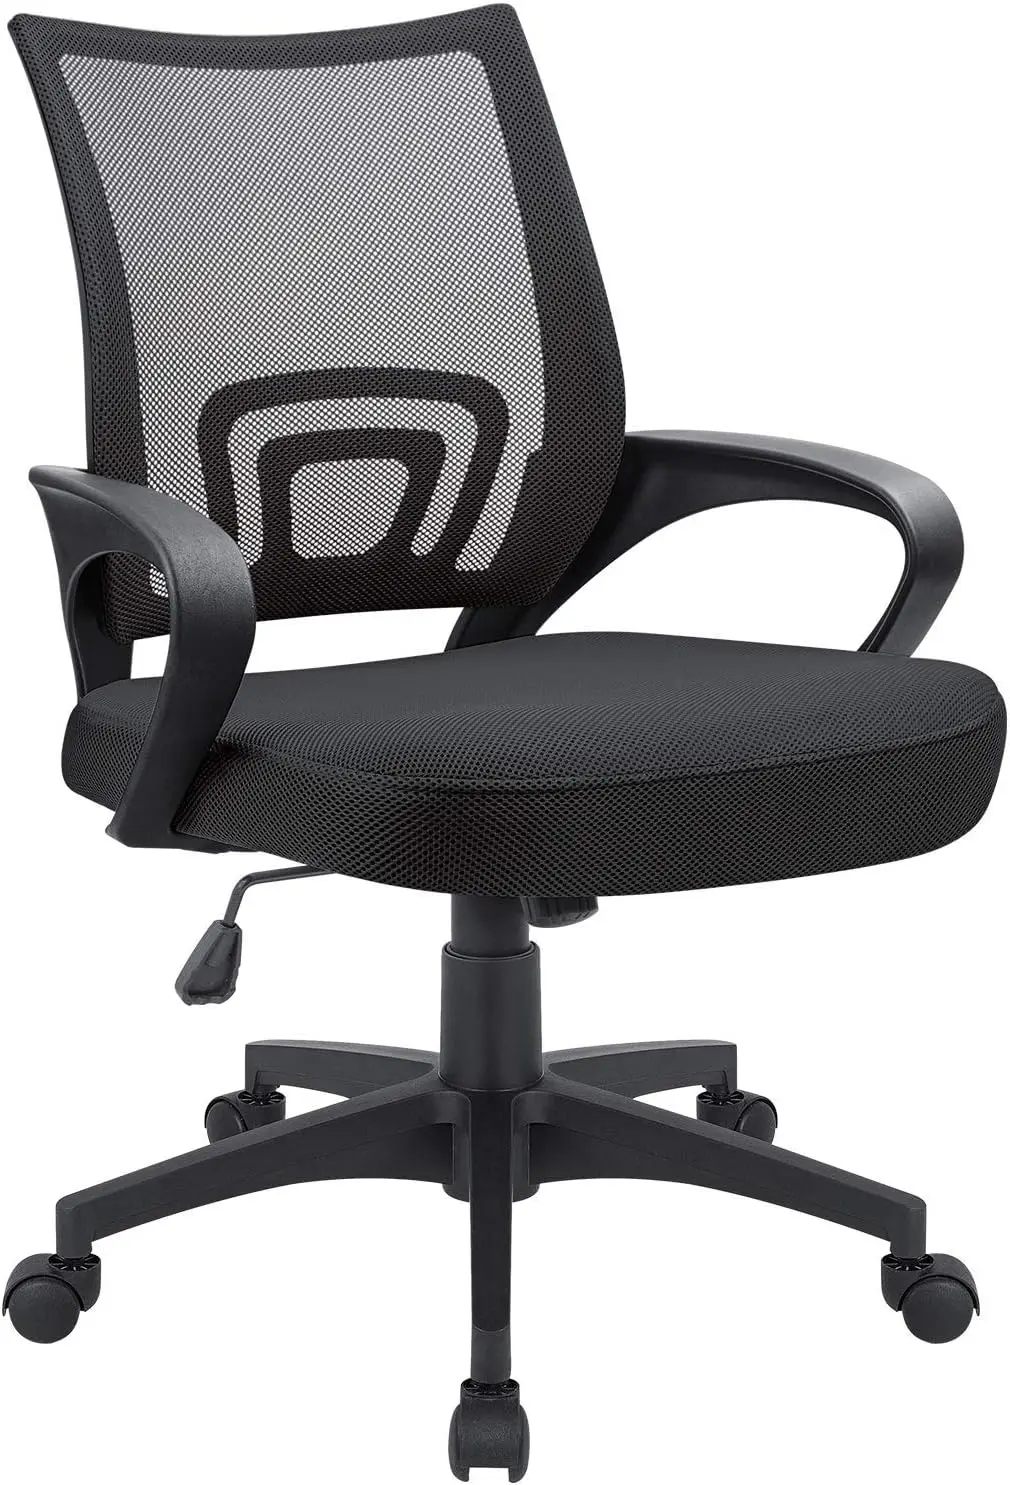 

Office Chair Ergonomic Computer Desk Chair Mid Back Swivel Rolling Chair with Height Adjustable Lumbar Support Mesh Executive